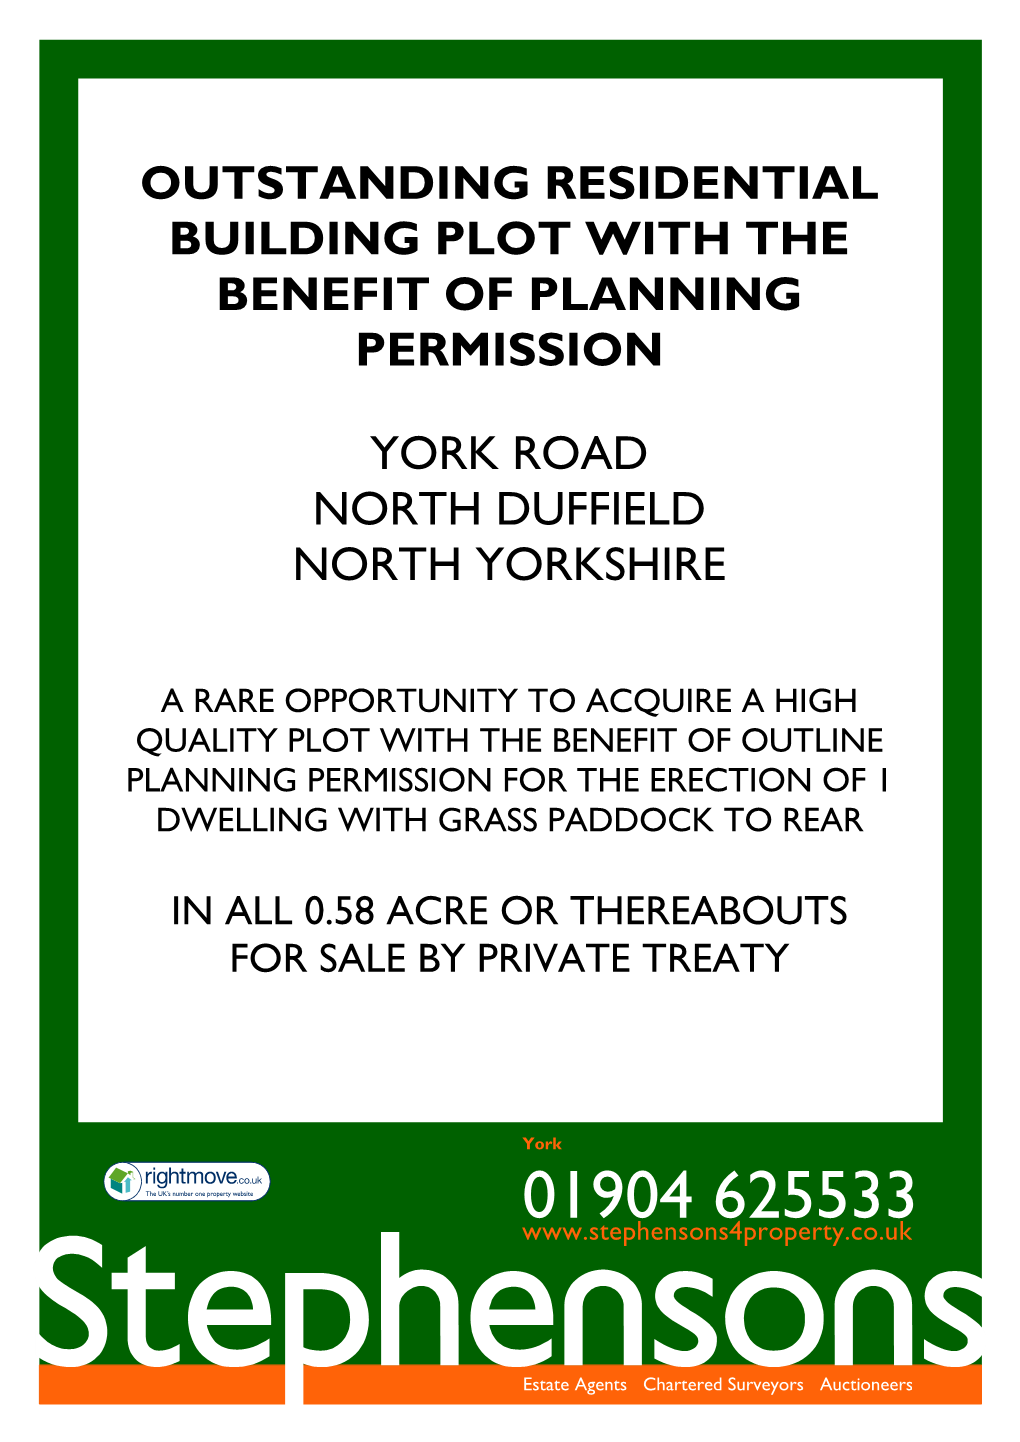 Outstanding Residential Building Plot with the Benefit of Planning Permission